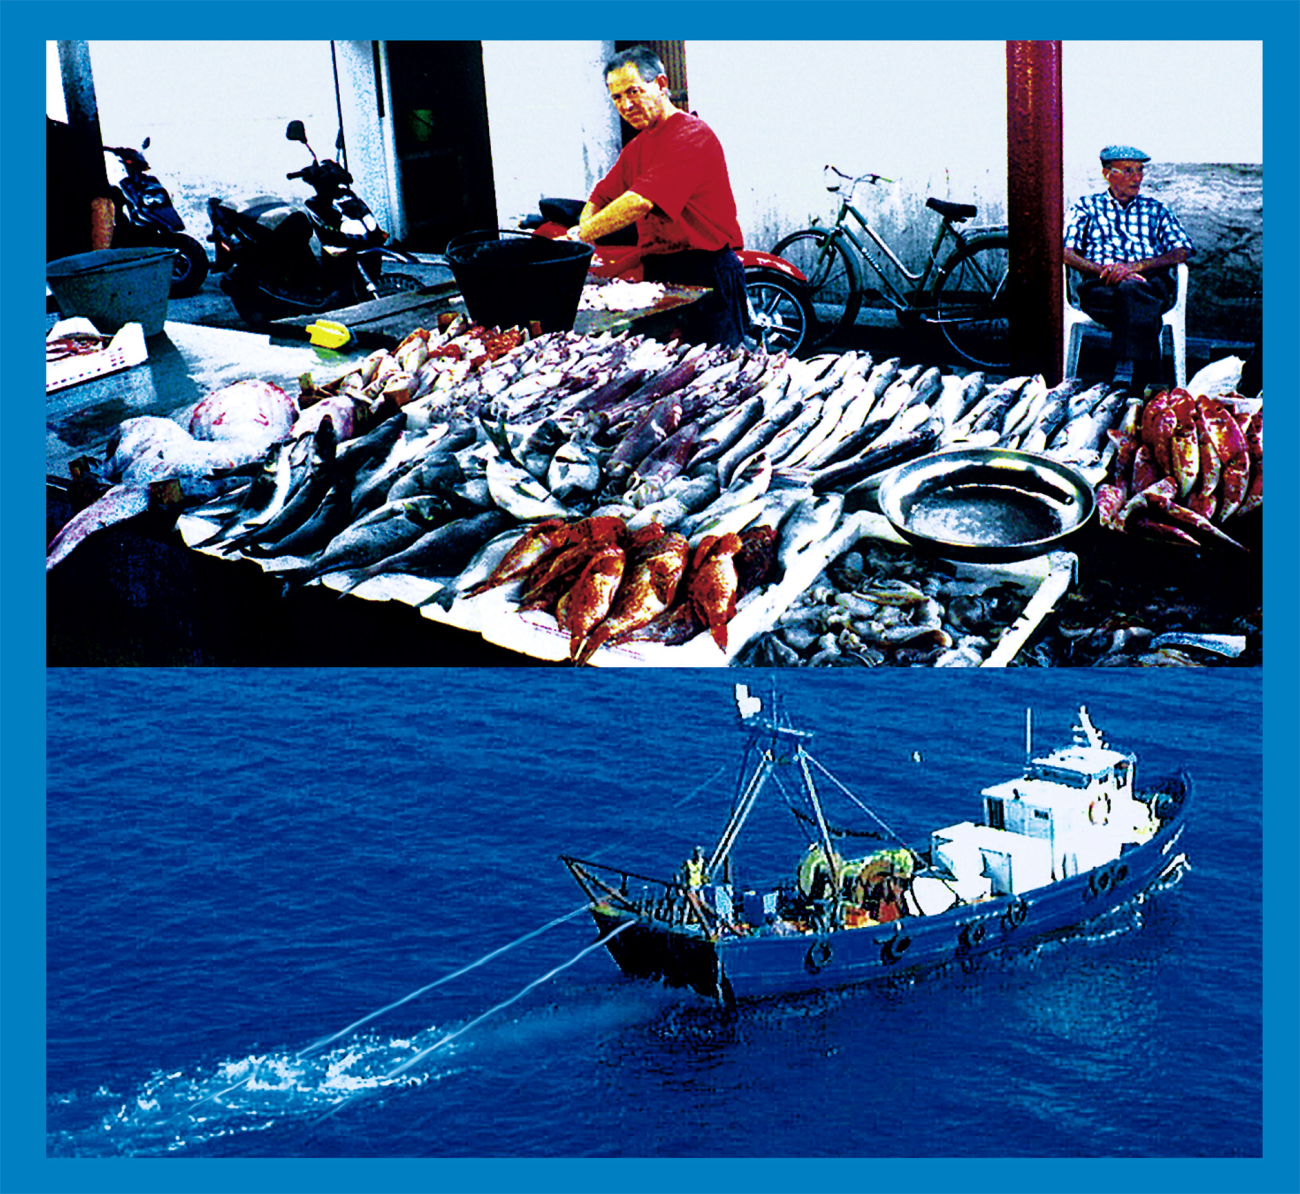 Demersal Fisheries:  Species living near the bottom are exploited by trawlers